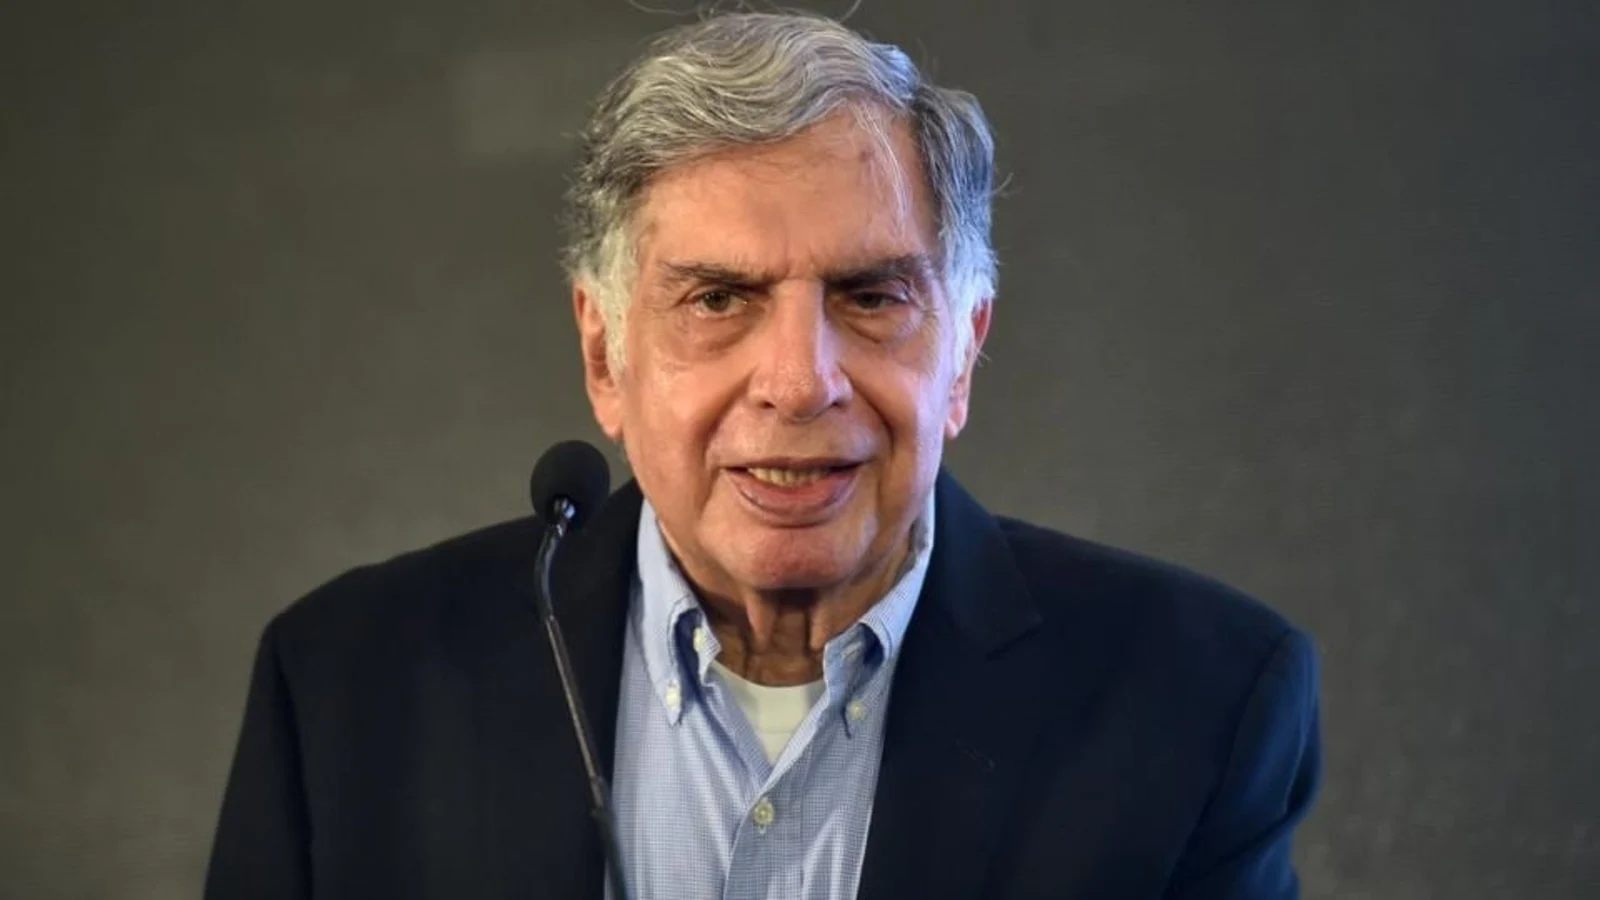 Evening brief: Ratan Tata says ‘grateful’ as SC rejects plea on Cyrus Mistry, and all the latest news